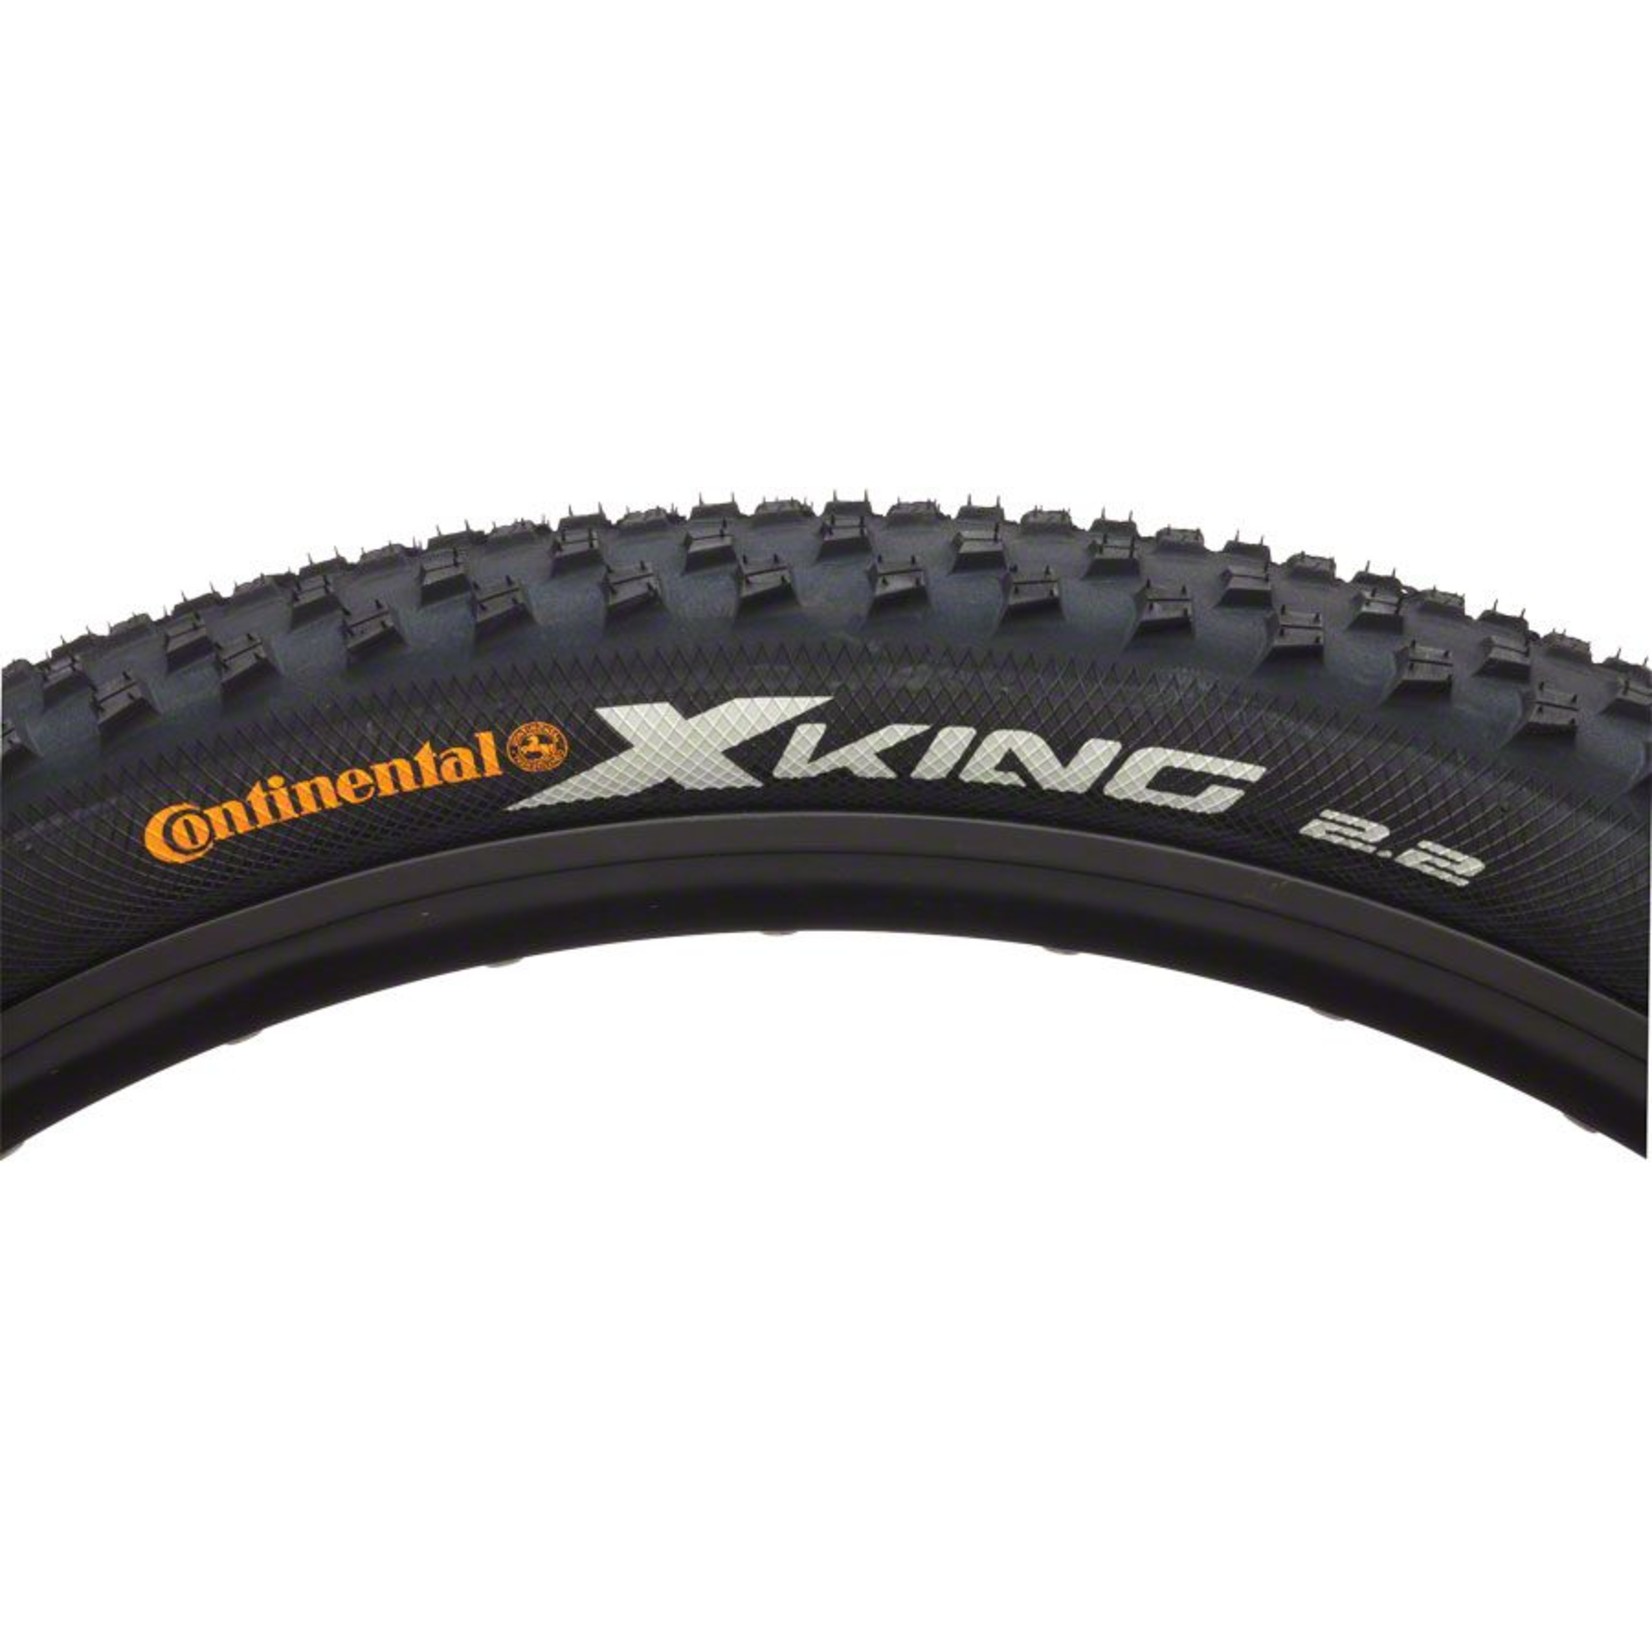 Continental X-King Tire 27.5x2.2 ProTection Folding Bead with Black Chili Rubber